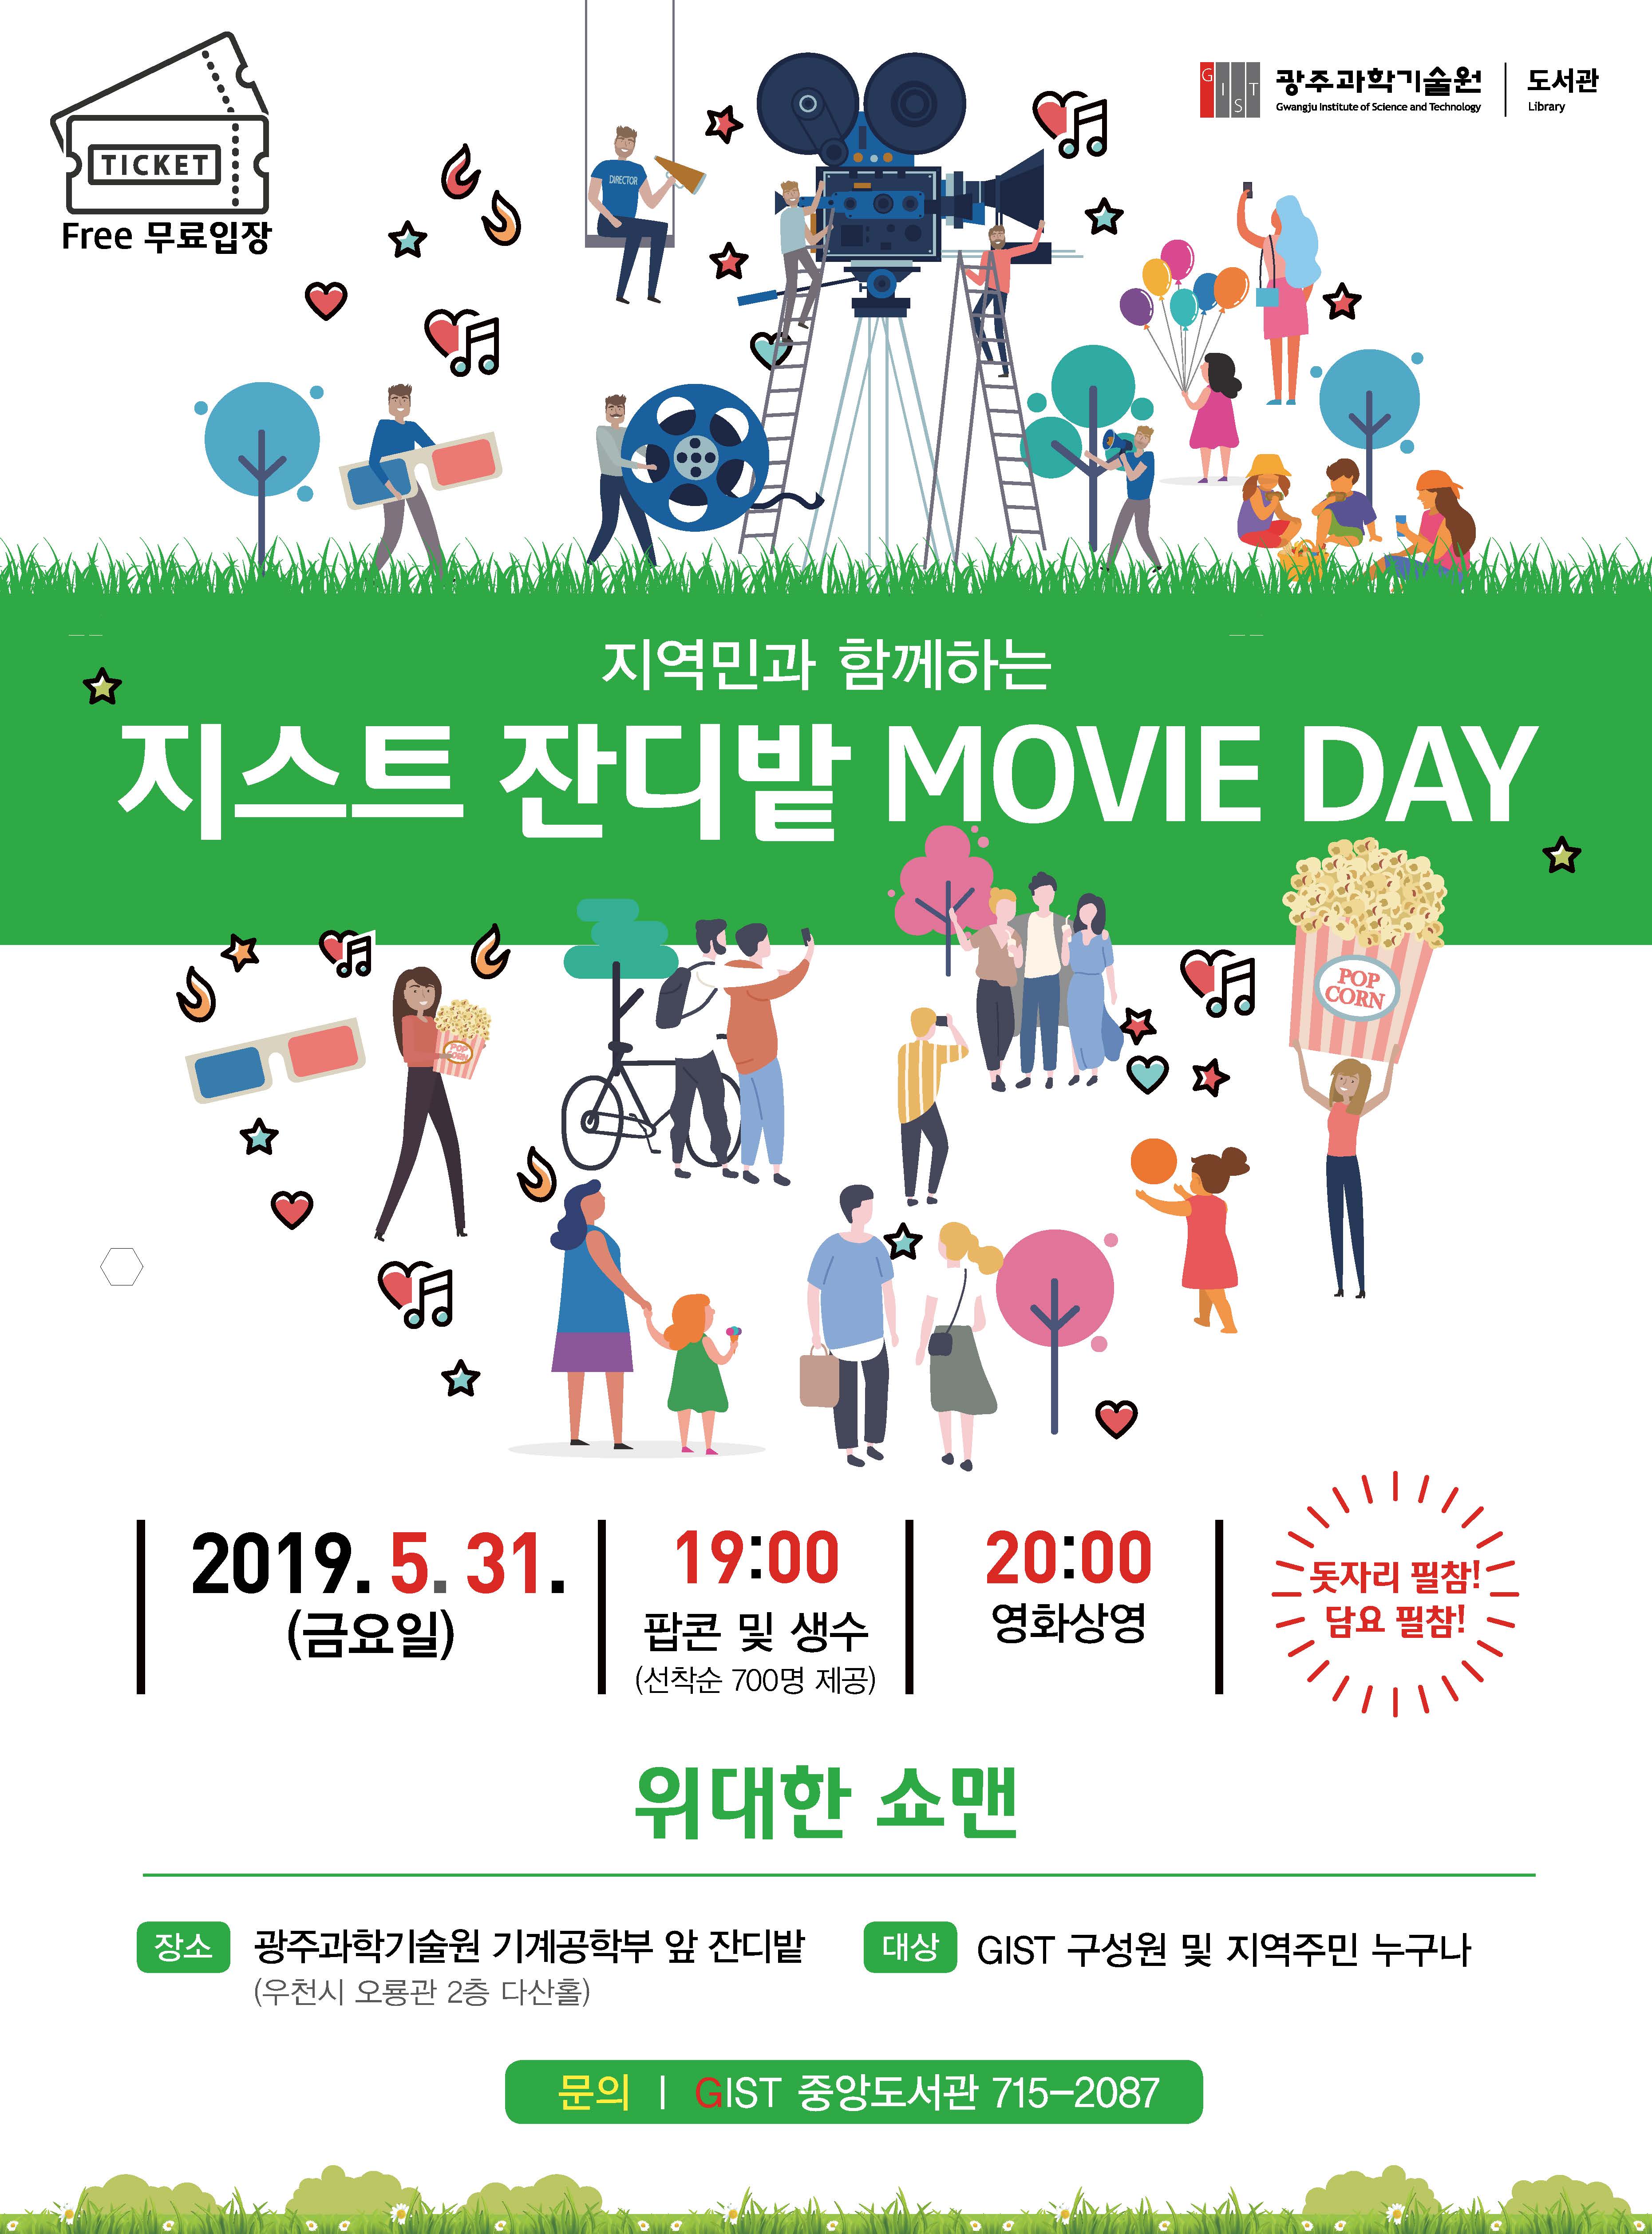 "GIST Courtyard Movie Day" – Want to watch a movie on the grass during an early summer night? 이미지